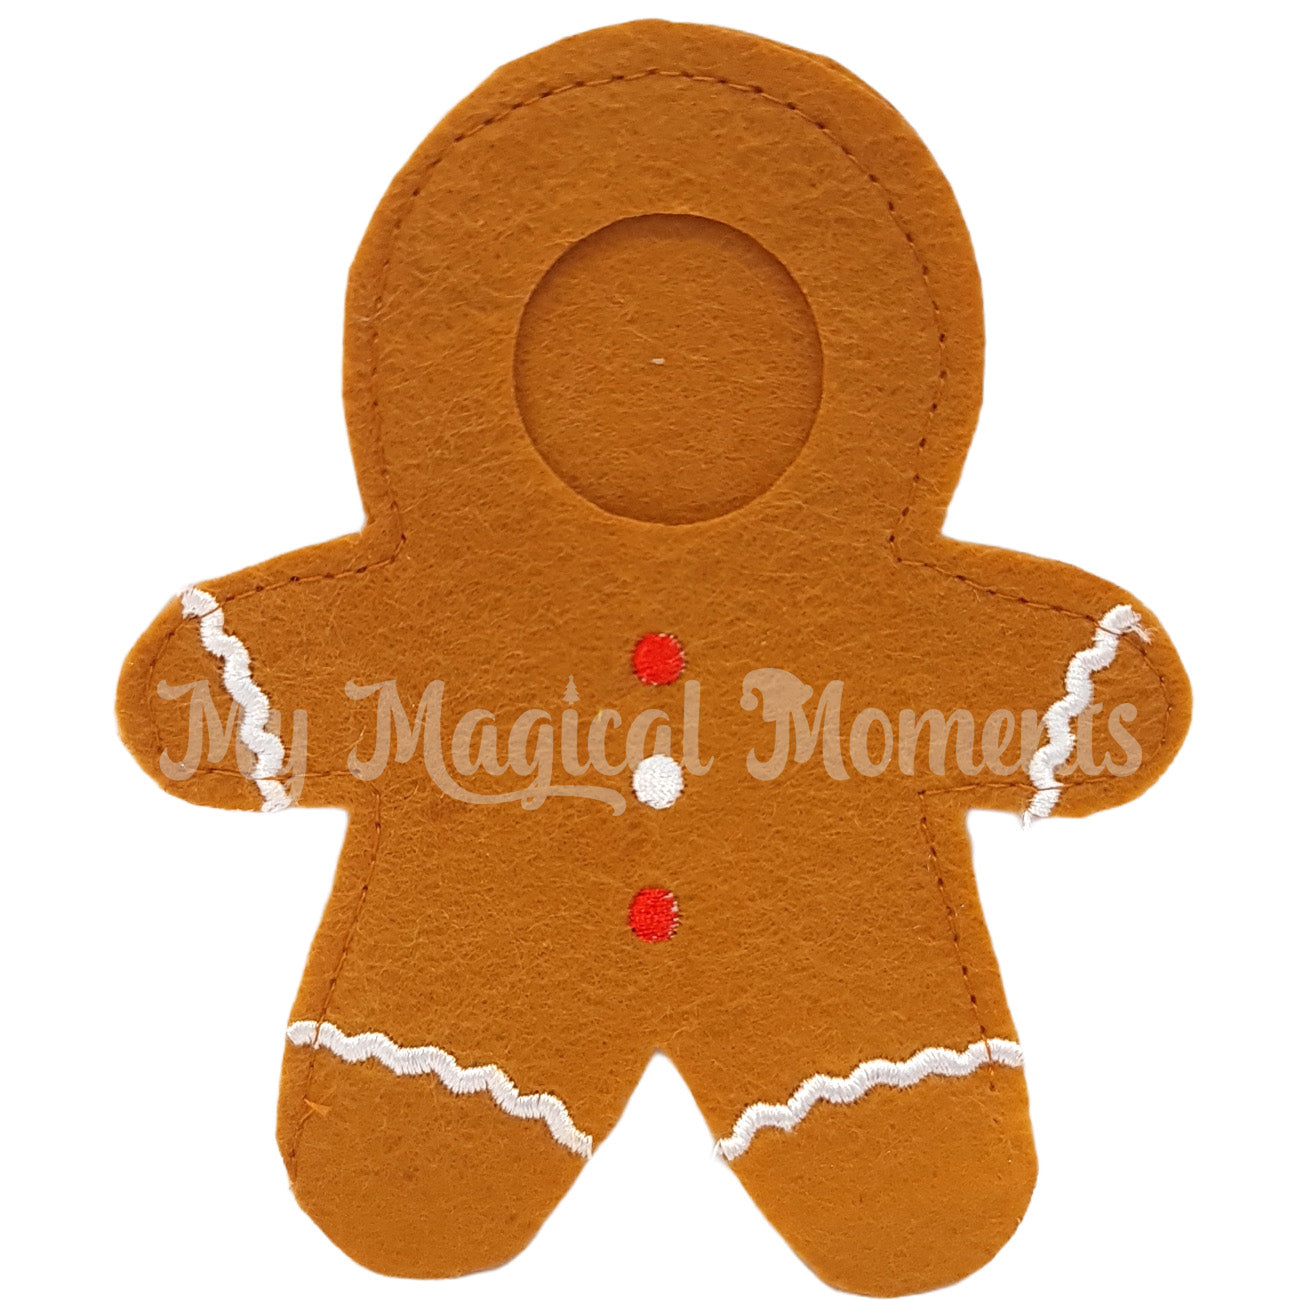 Elf baby gingerbread costume. Red and white button with white icing